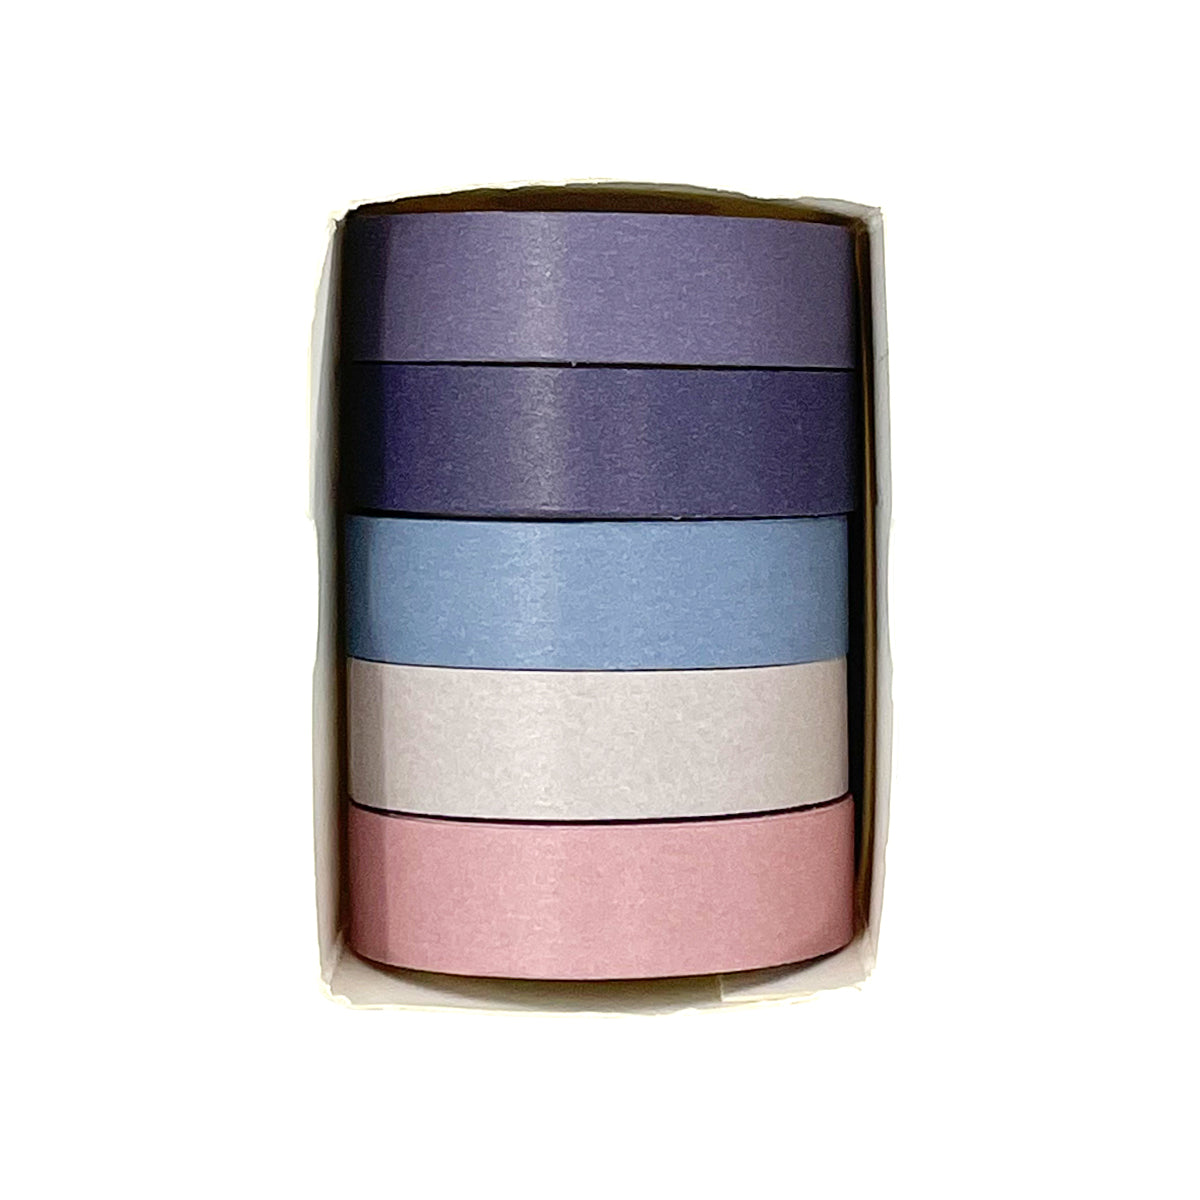 Wrapables Solid Color Washi Tape (Set of 5) Rainbow